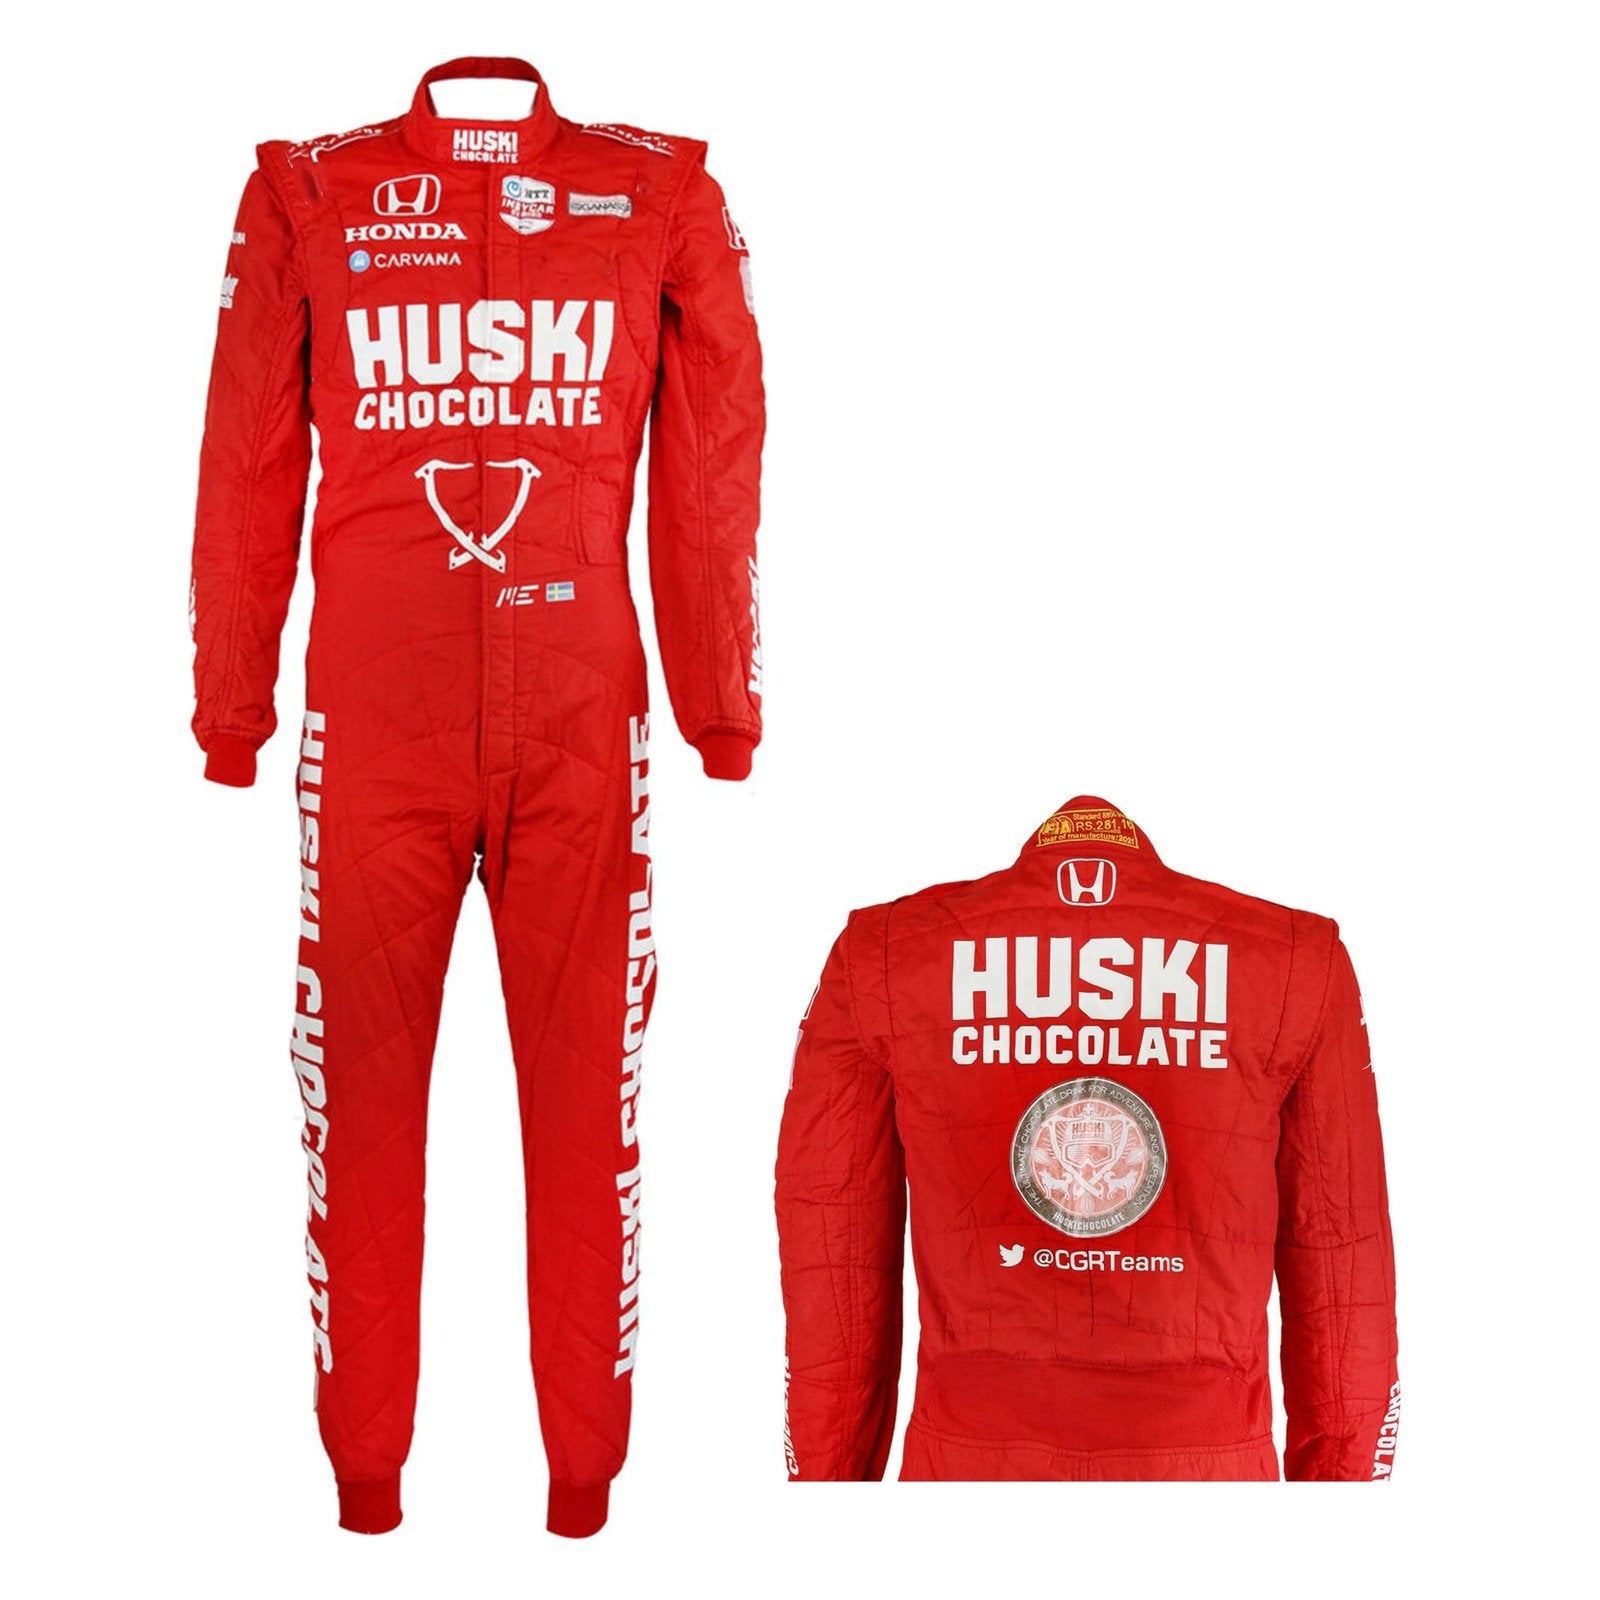 Go kart racing Sublimation Protective clothing Racing gear Suit NN-035